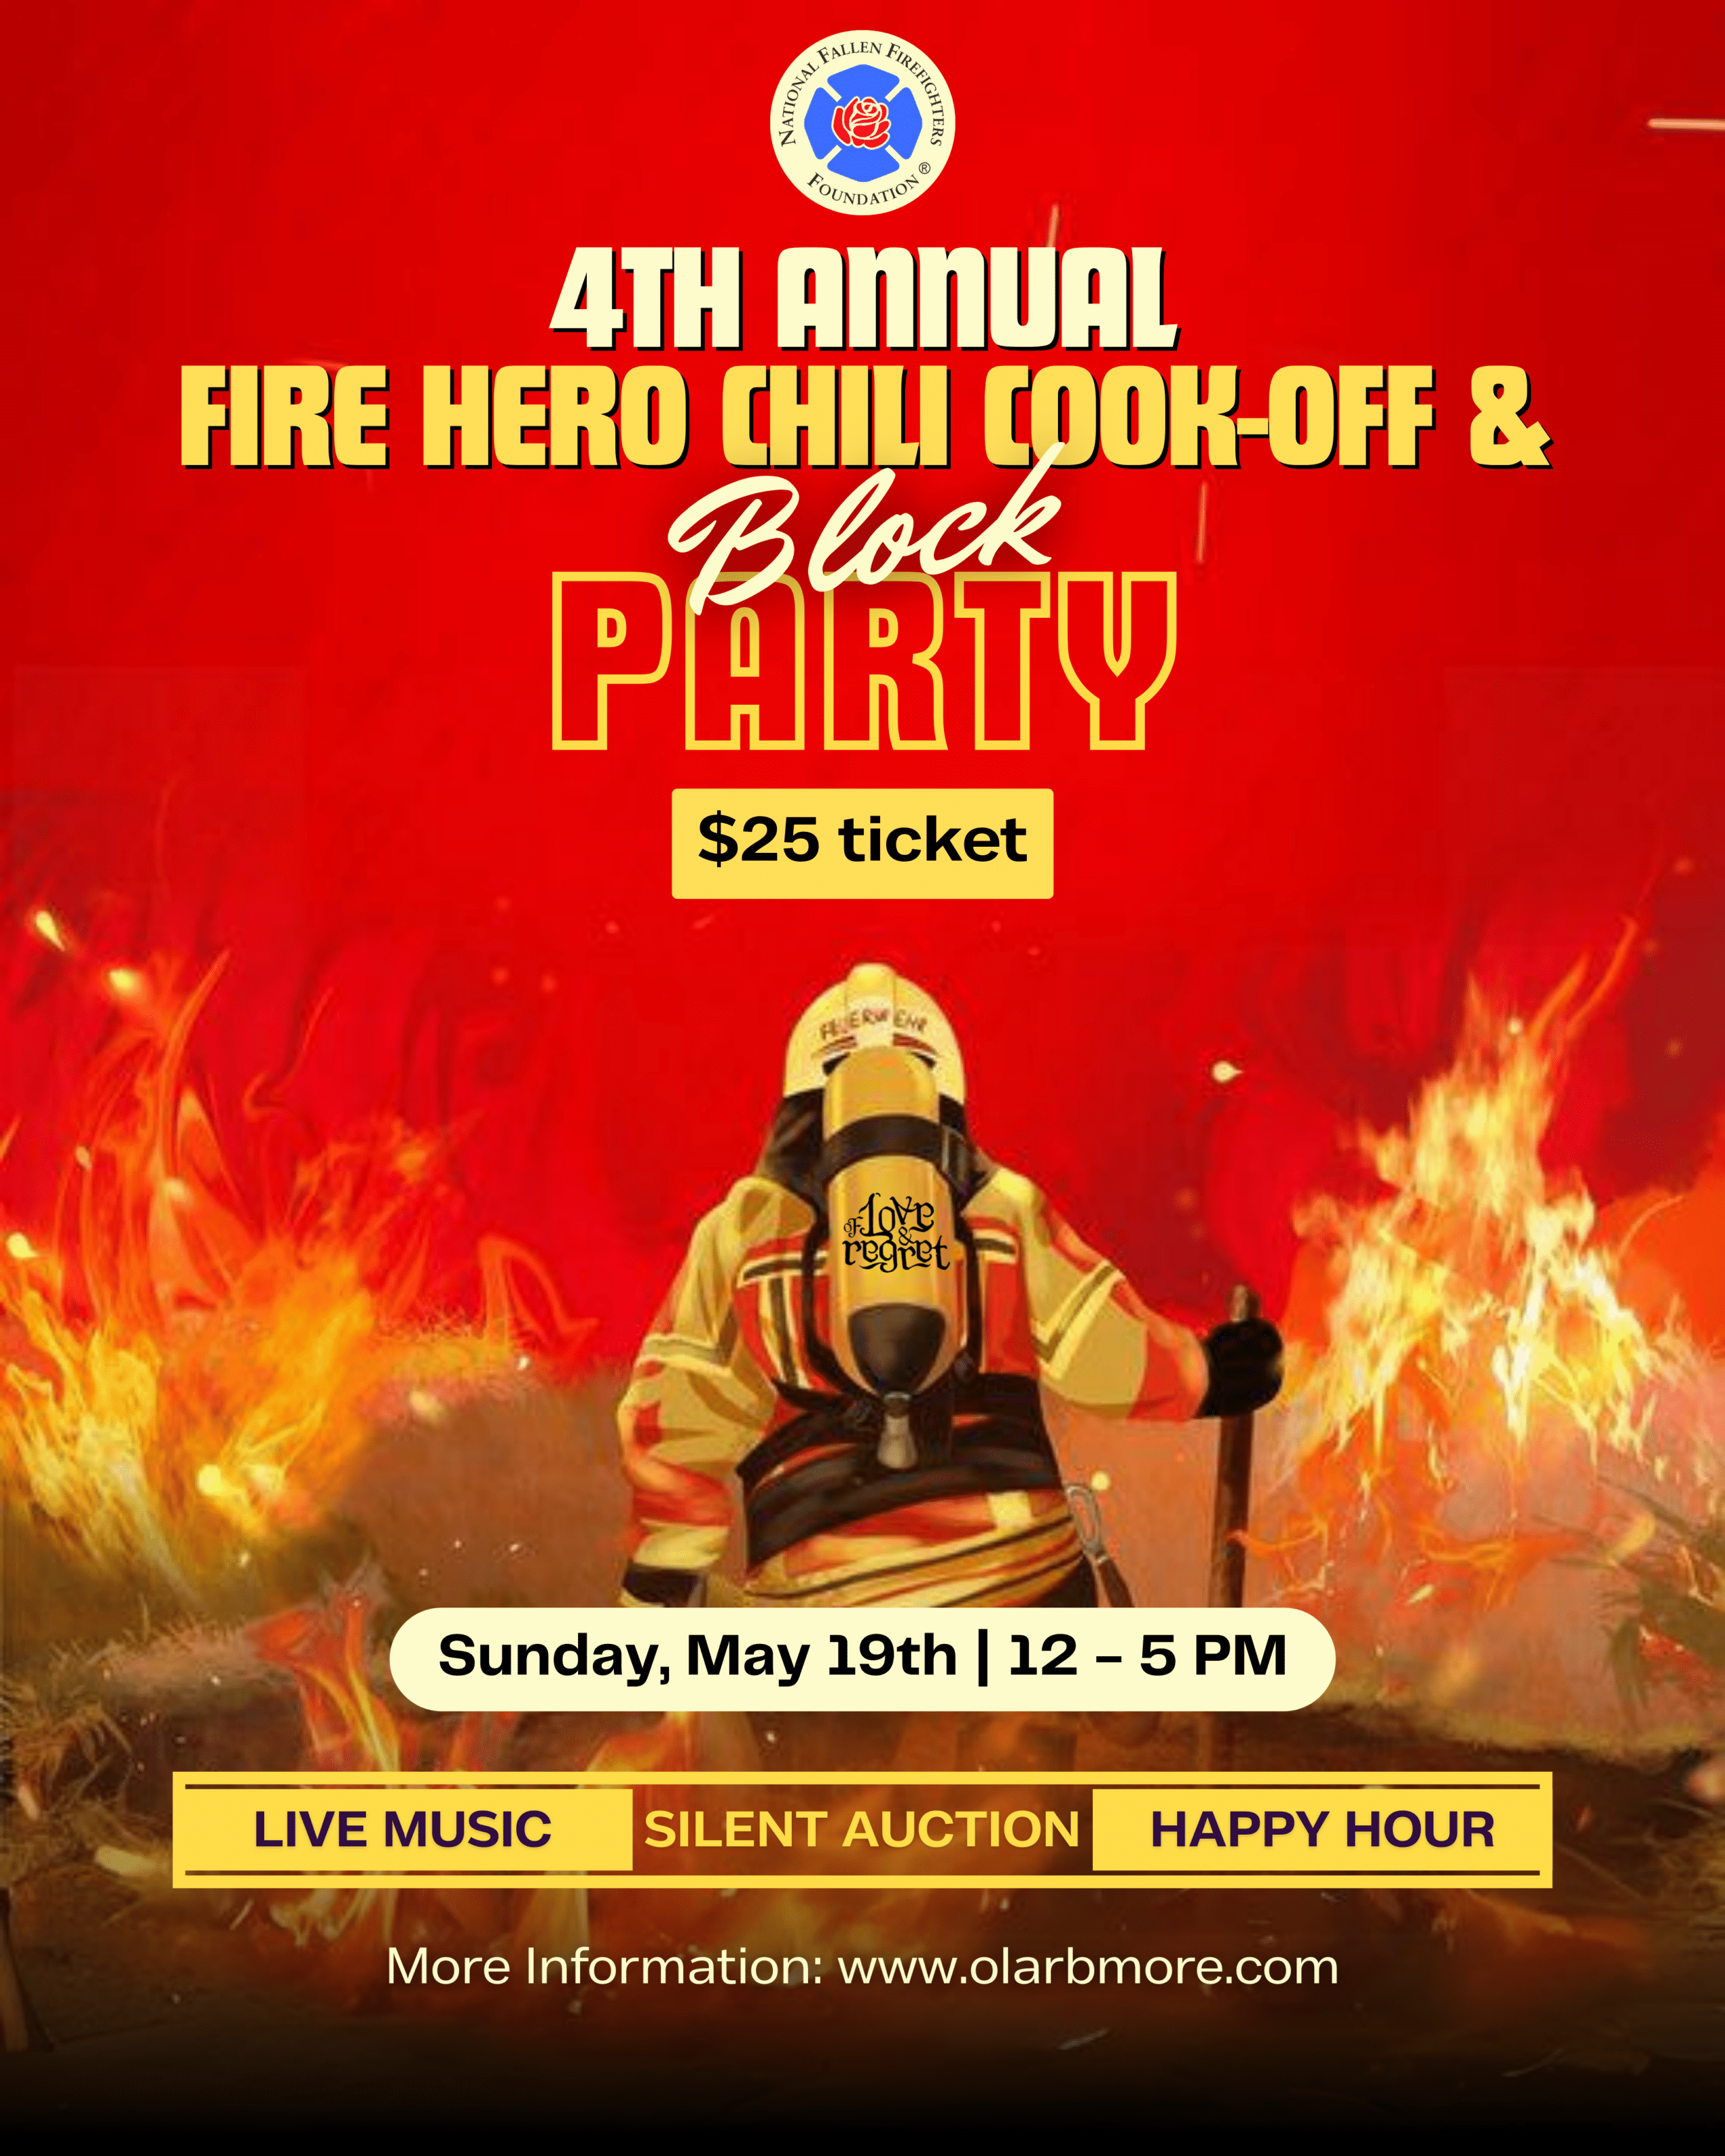 Fire Hero Chili Cook-off & Block Party on Sunday May 19th from 12 - 5pm for $25 with all proceeds benefiting the National Fallen Firefighters Foundation.